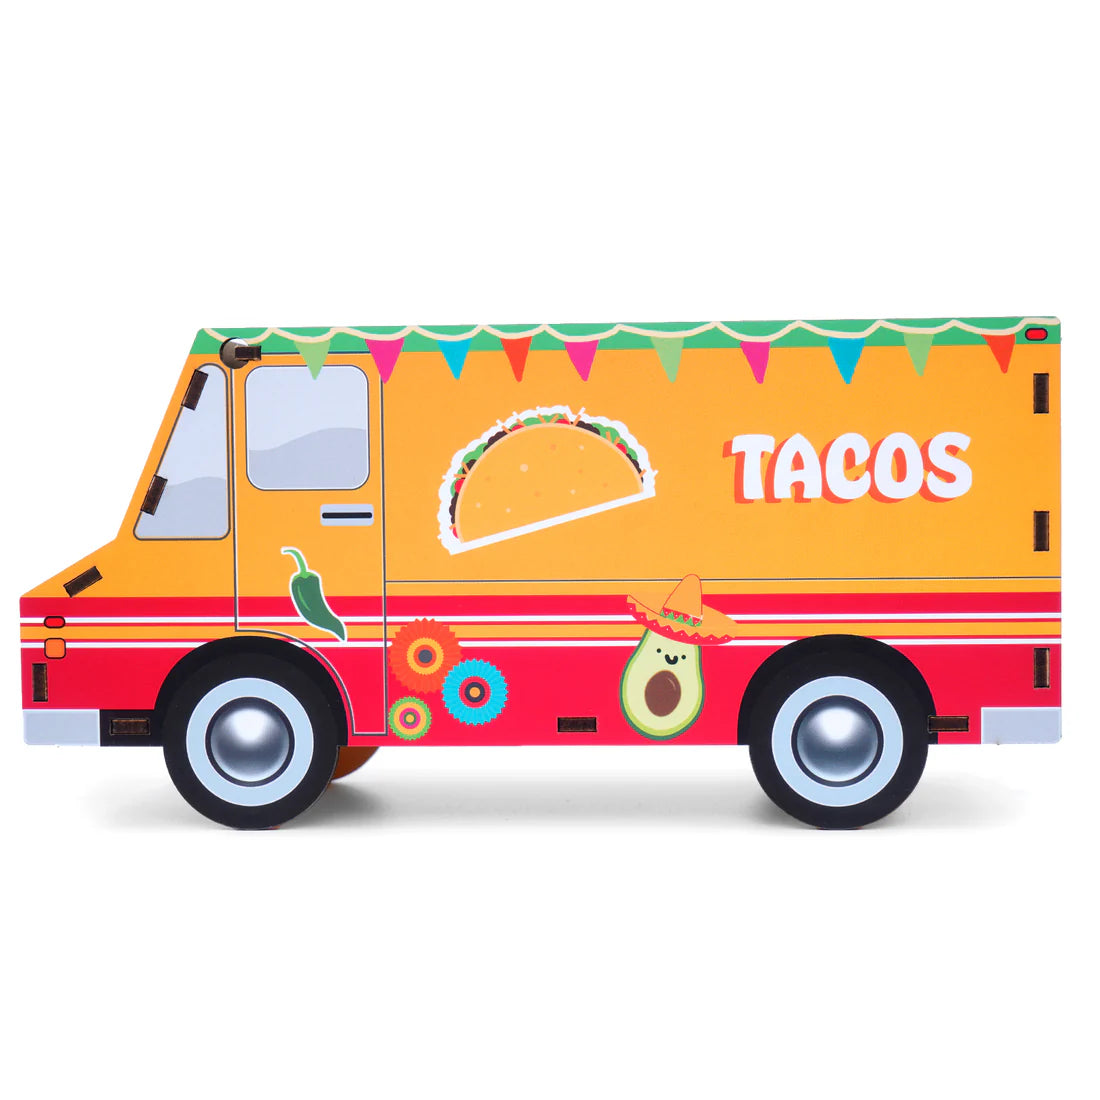 Taco truck piggy bank - side view. "Tacos" and happy avocado designs on side of truck with colorful banners.